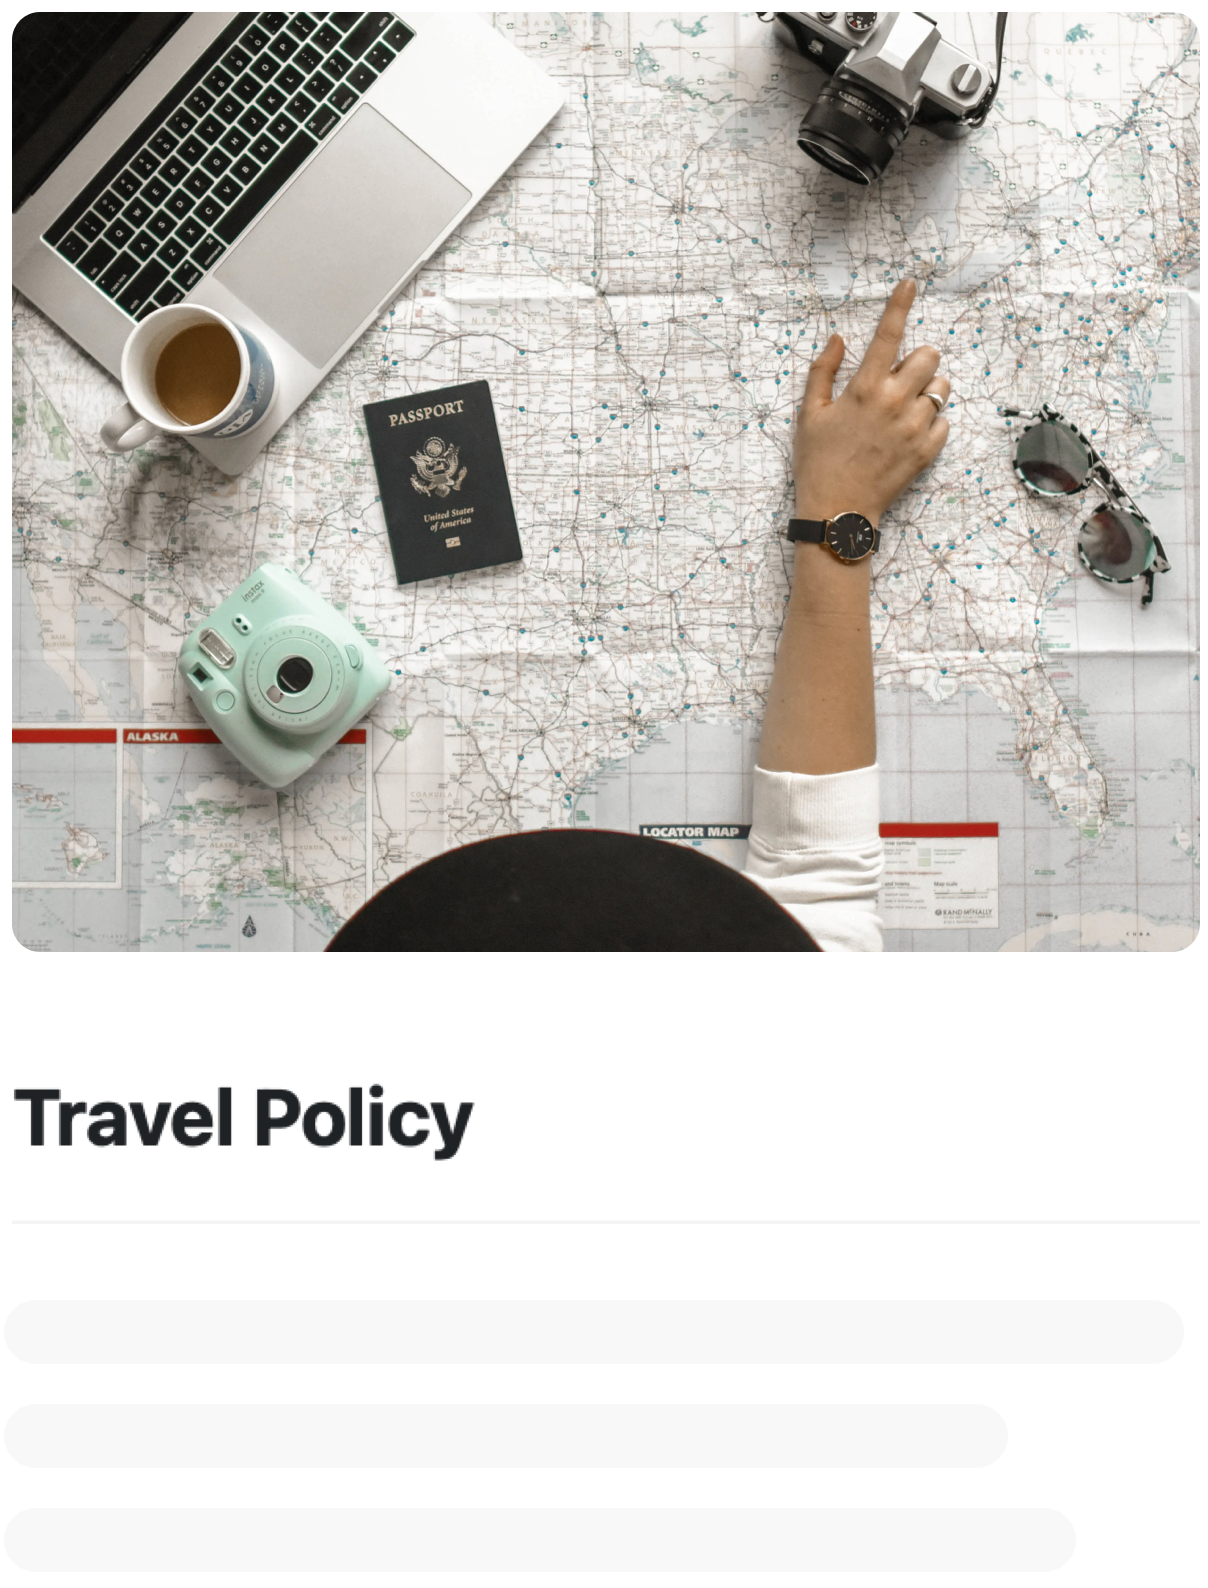 Knowledge base page for the company travel policy in Newestxxx